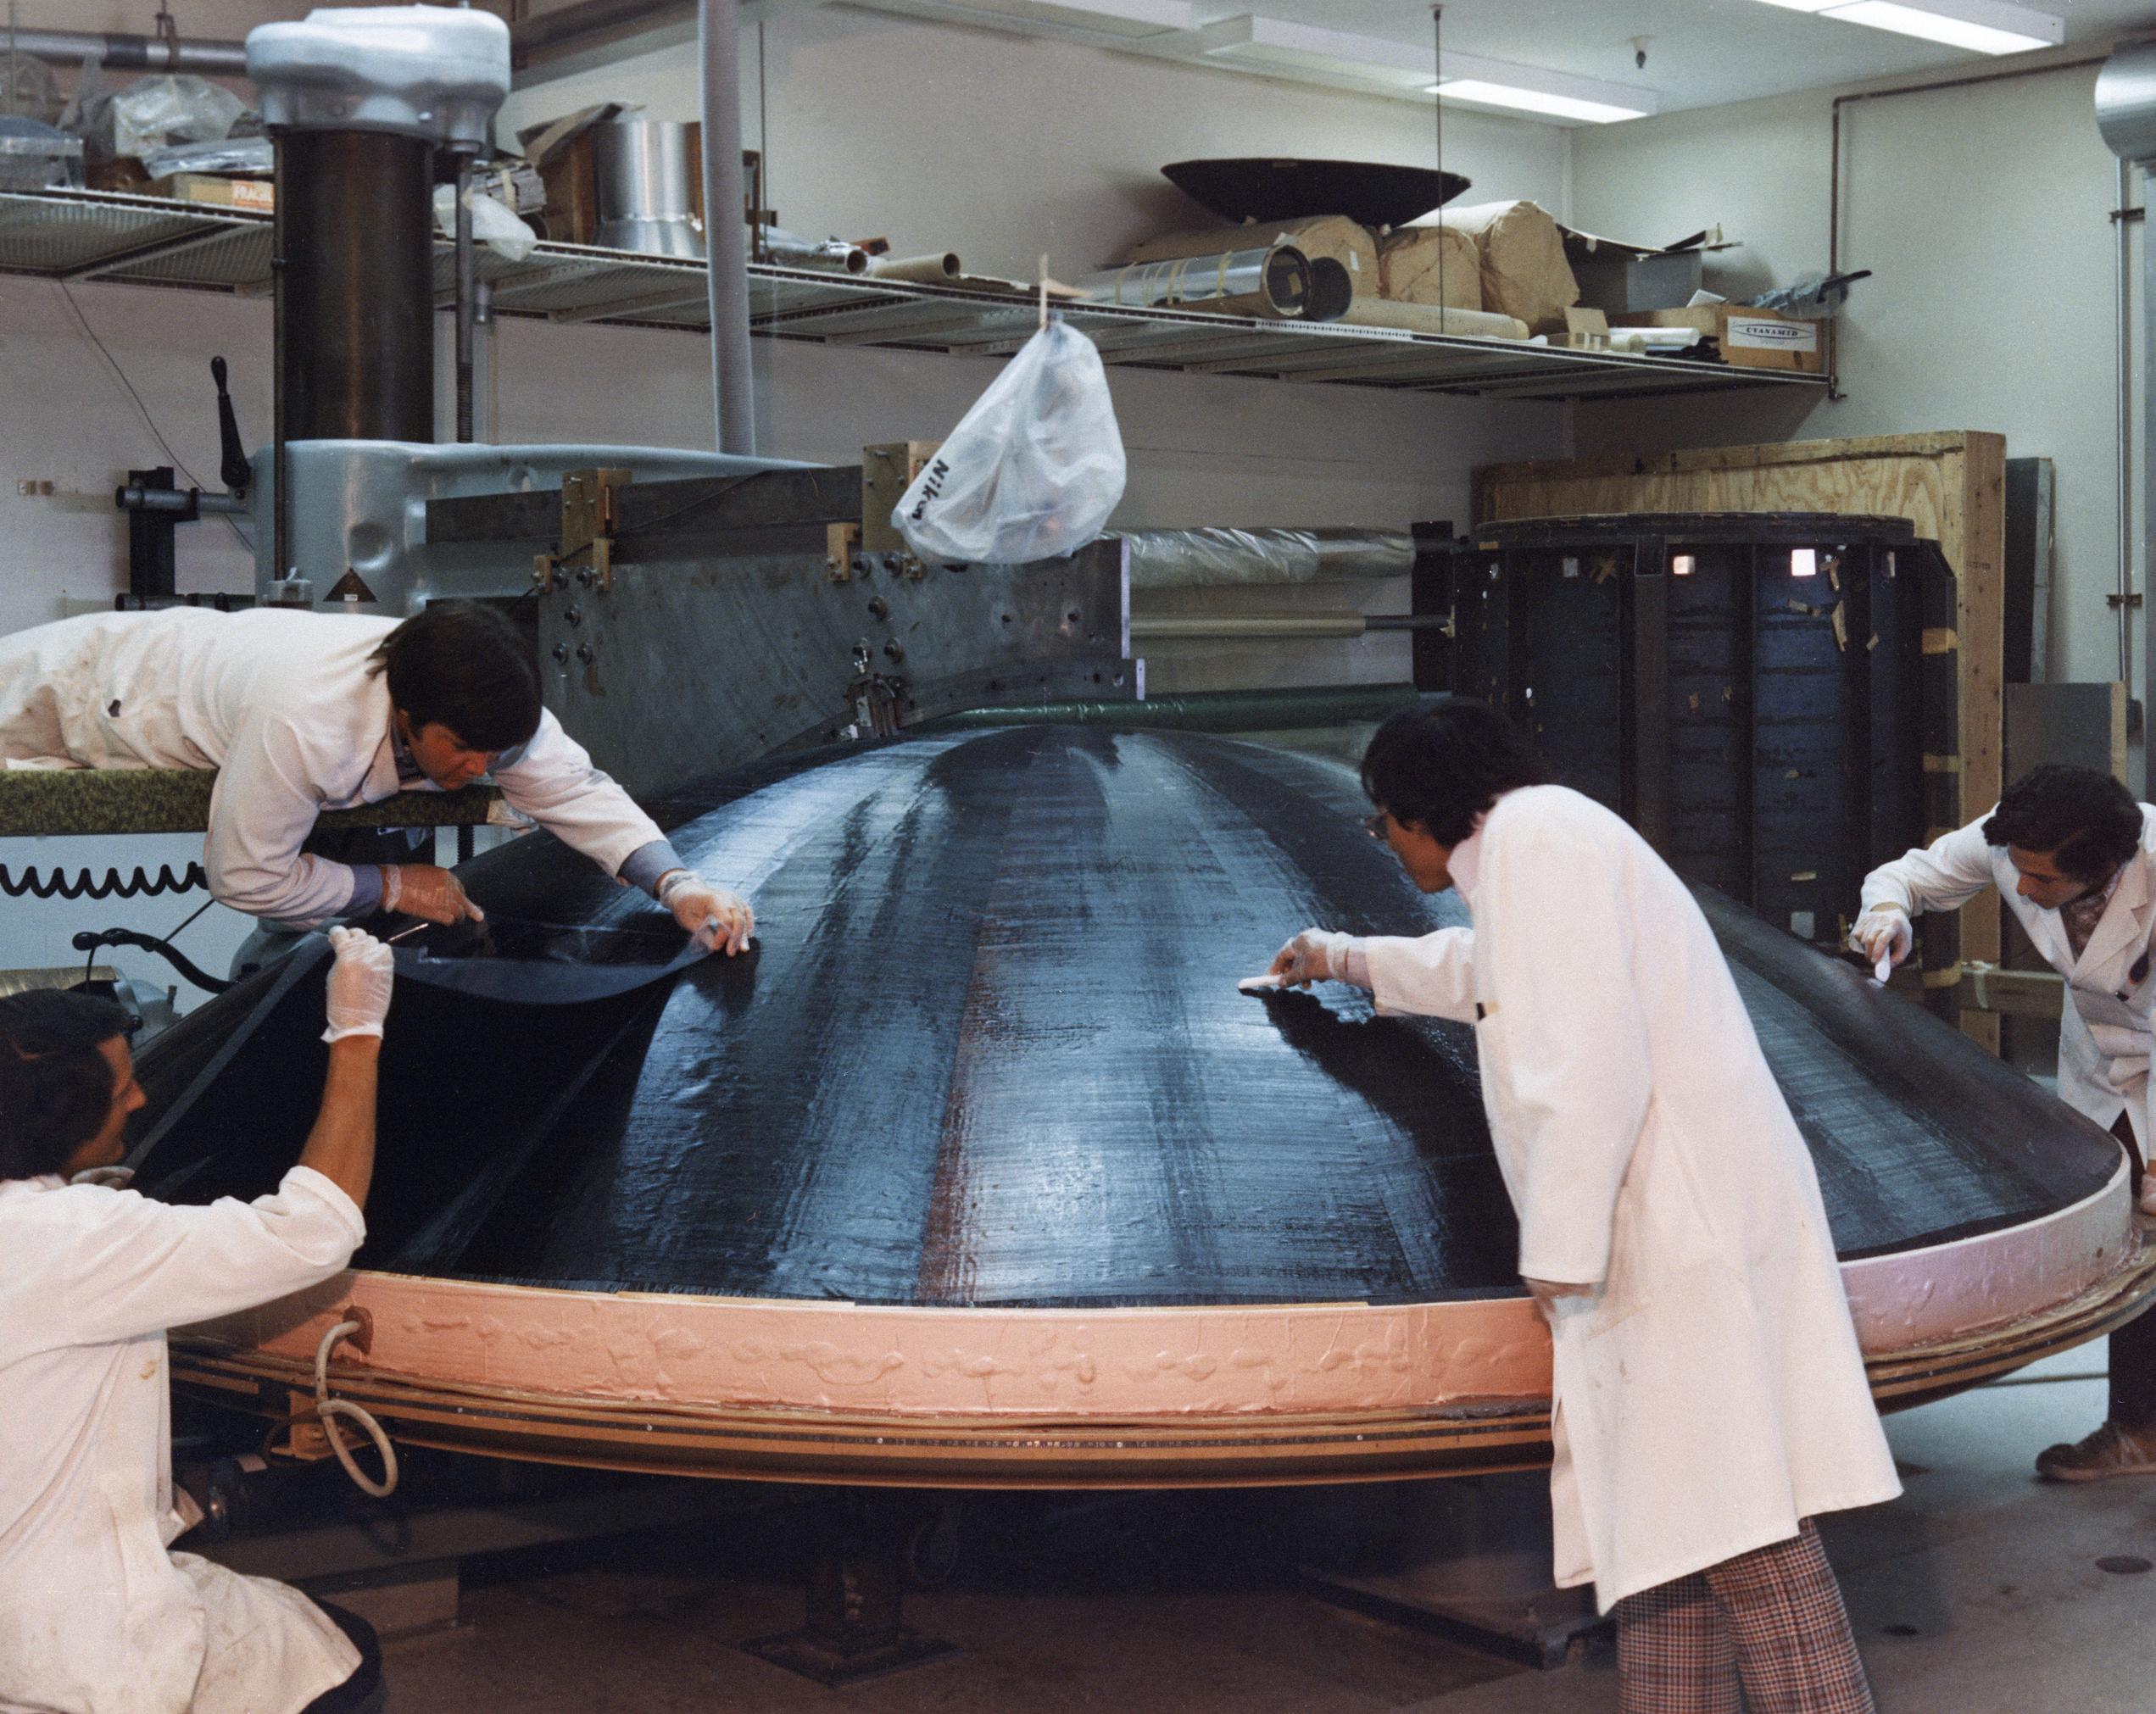 Engineers working on the construction of a large, dish-shaped Voyager high-gain antenna